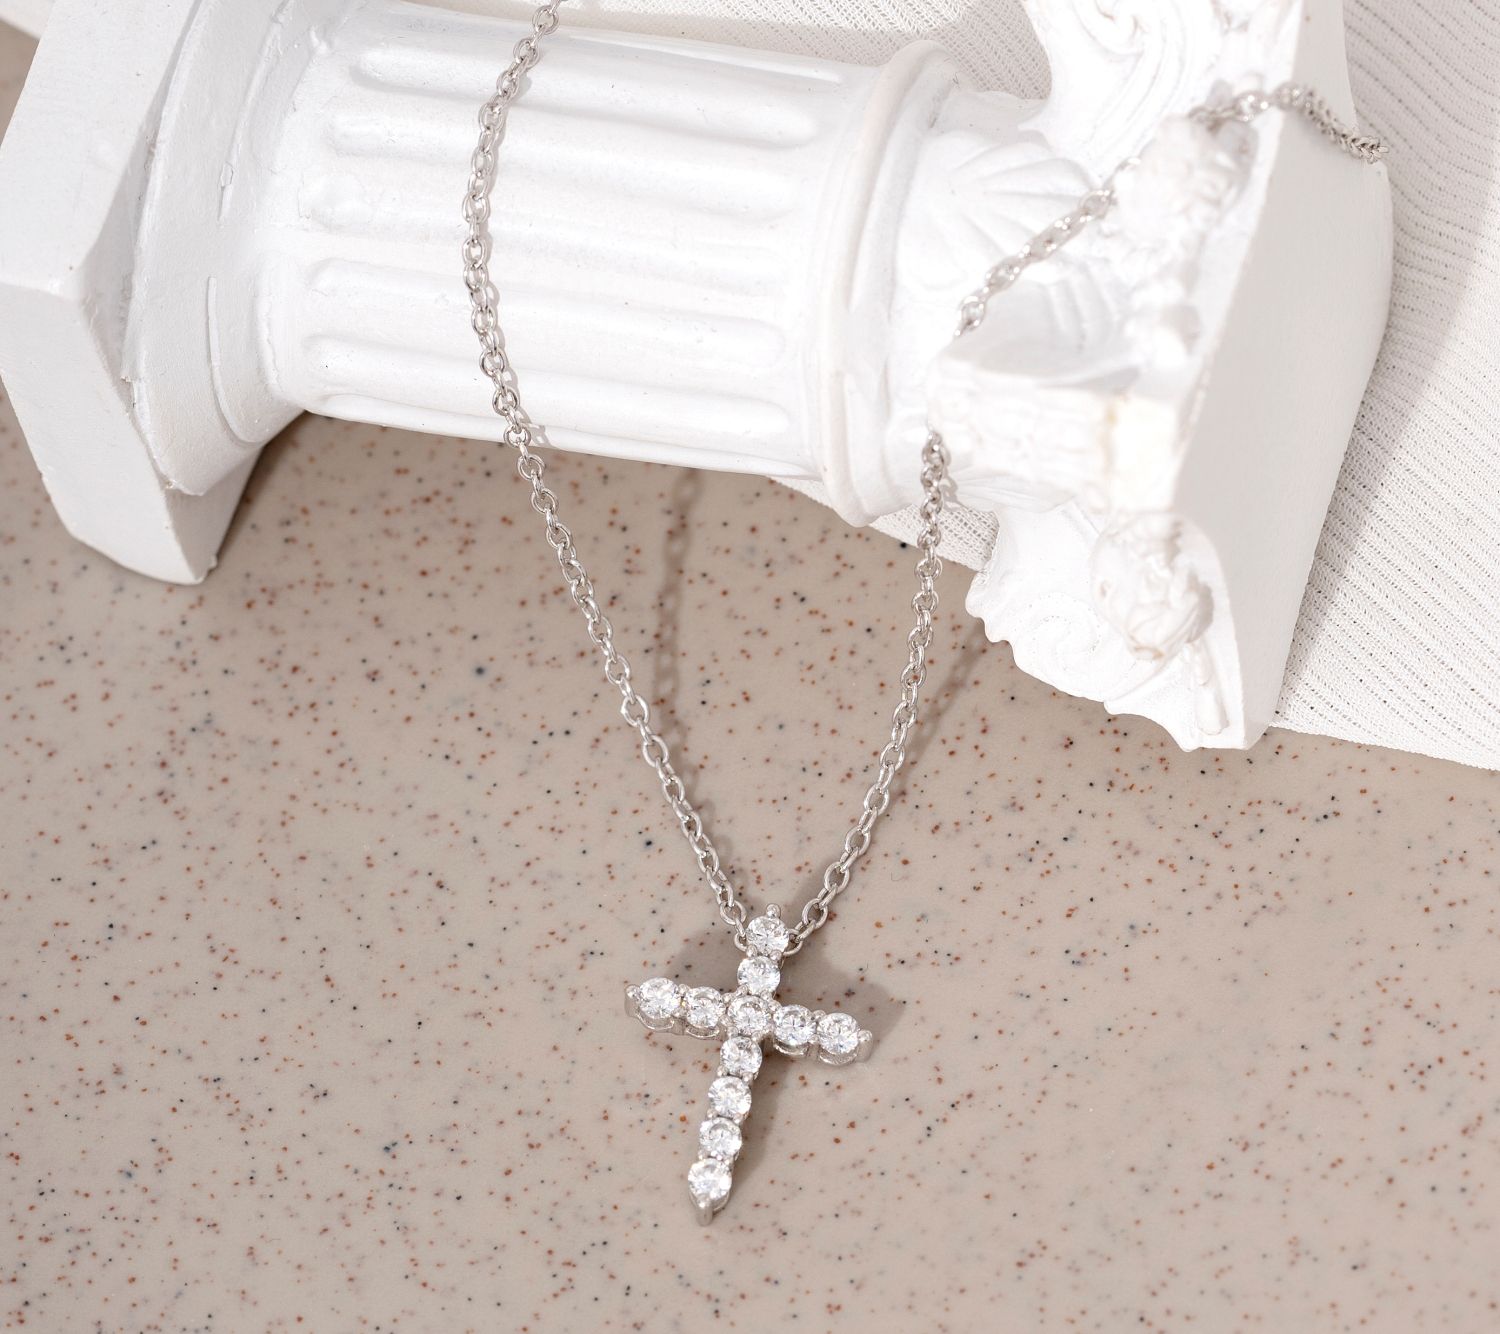 Peter Thomas Roth Signature Classic Cross Necklace in Sterling Silver